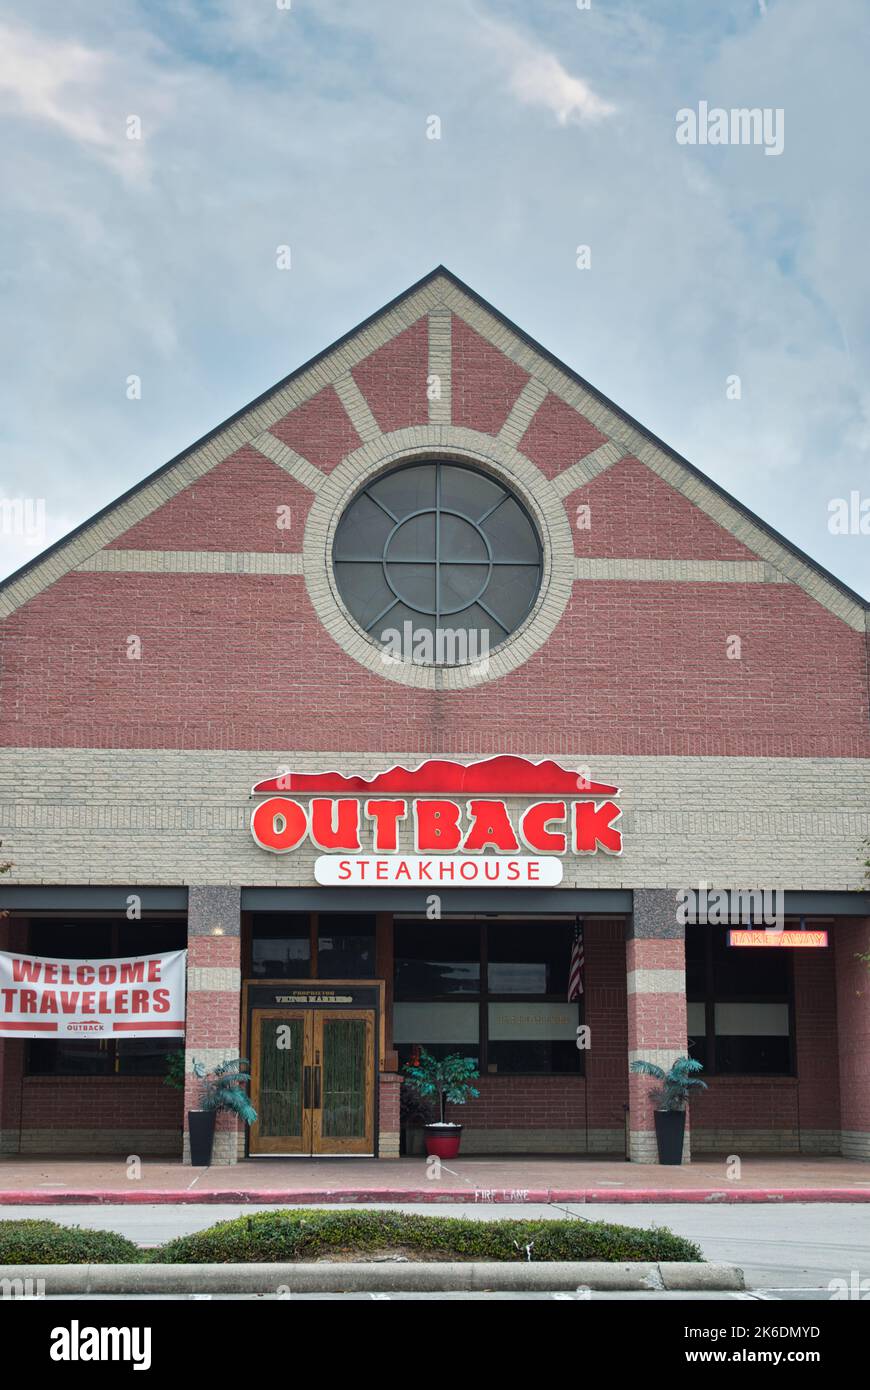 Houston, Texas USA 12-03-2021: Outback Steakhouse storefront and front entrance in Houston TX. Australian themed American restaurant founded in 1988. Stock Photo